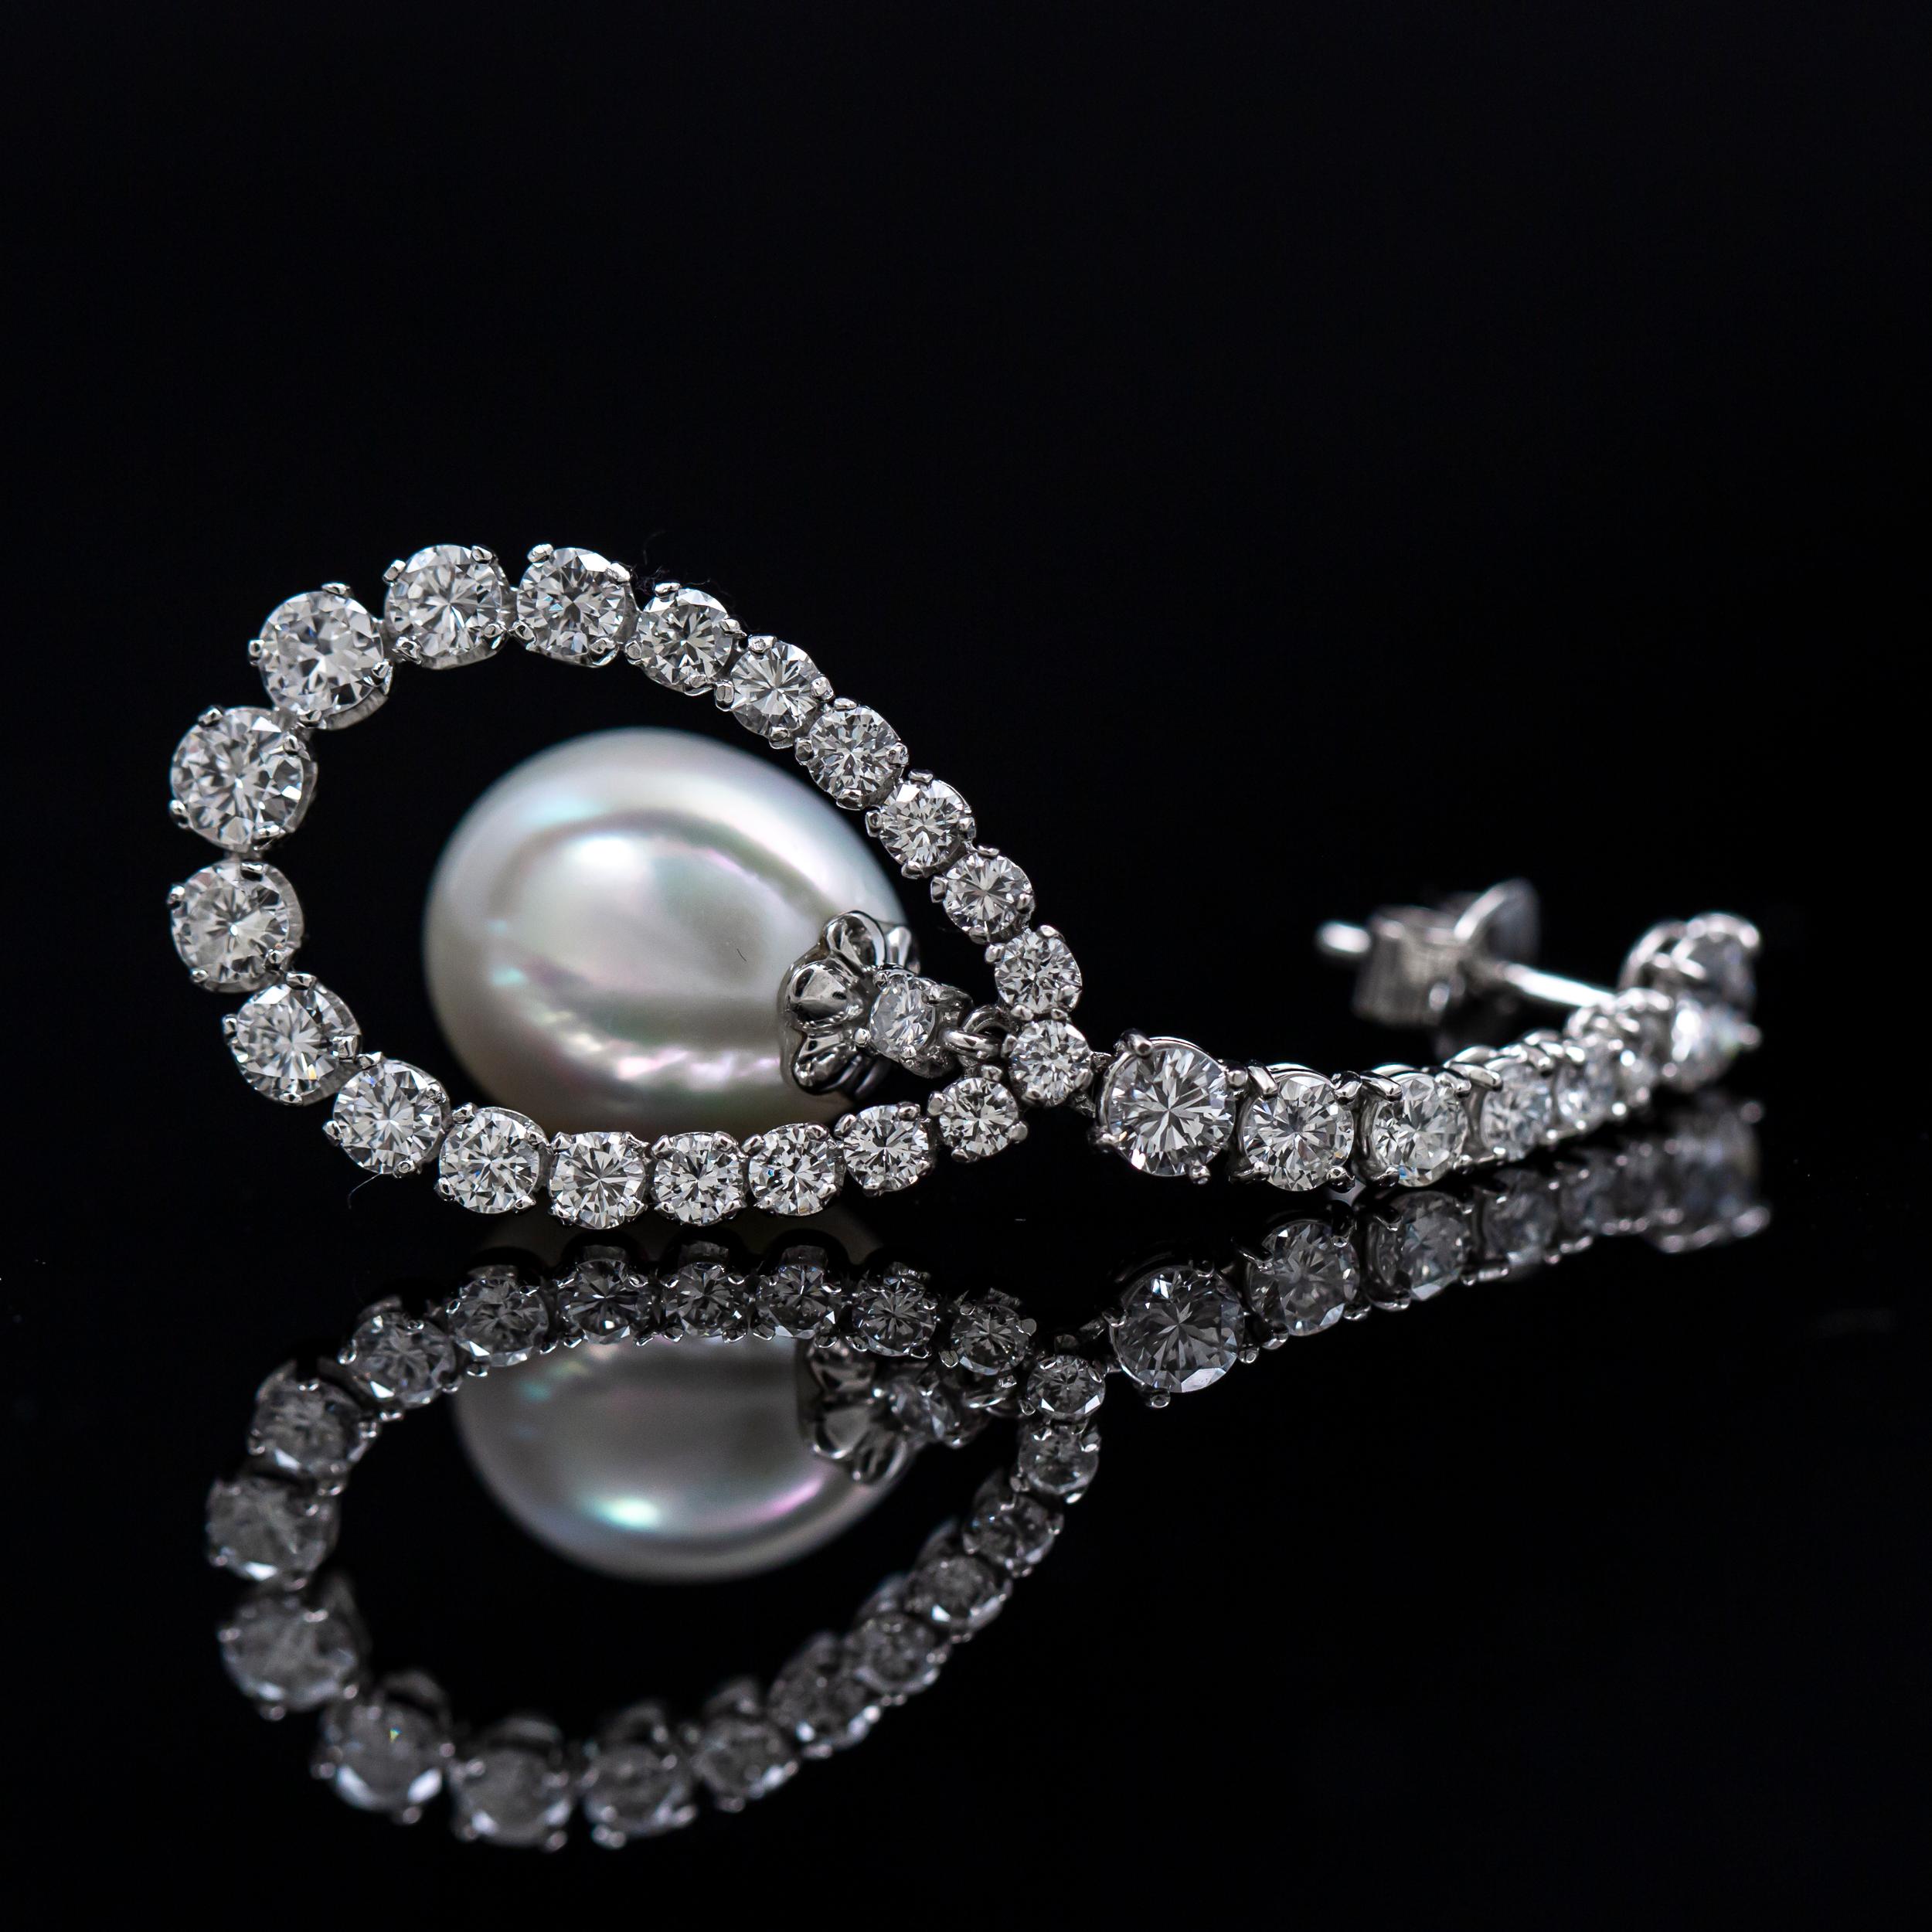 Vintage 6 Carat Diamond Cultured Pearl Drop Earrings White Gold 20th Century For Sale 1